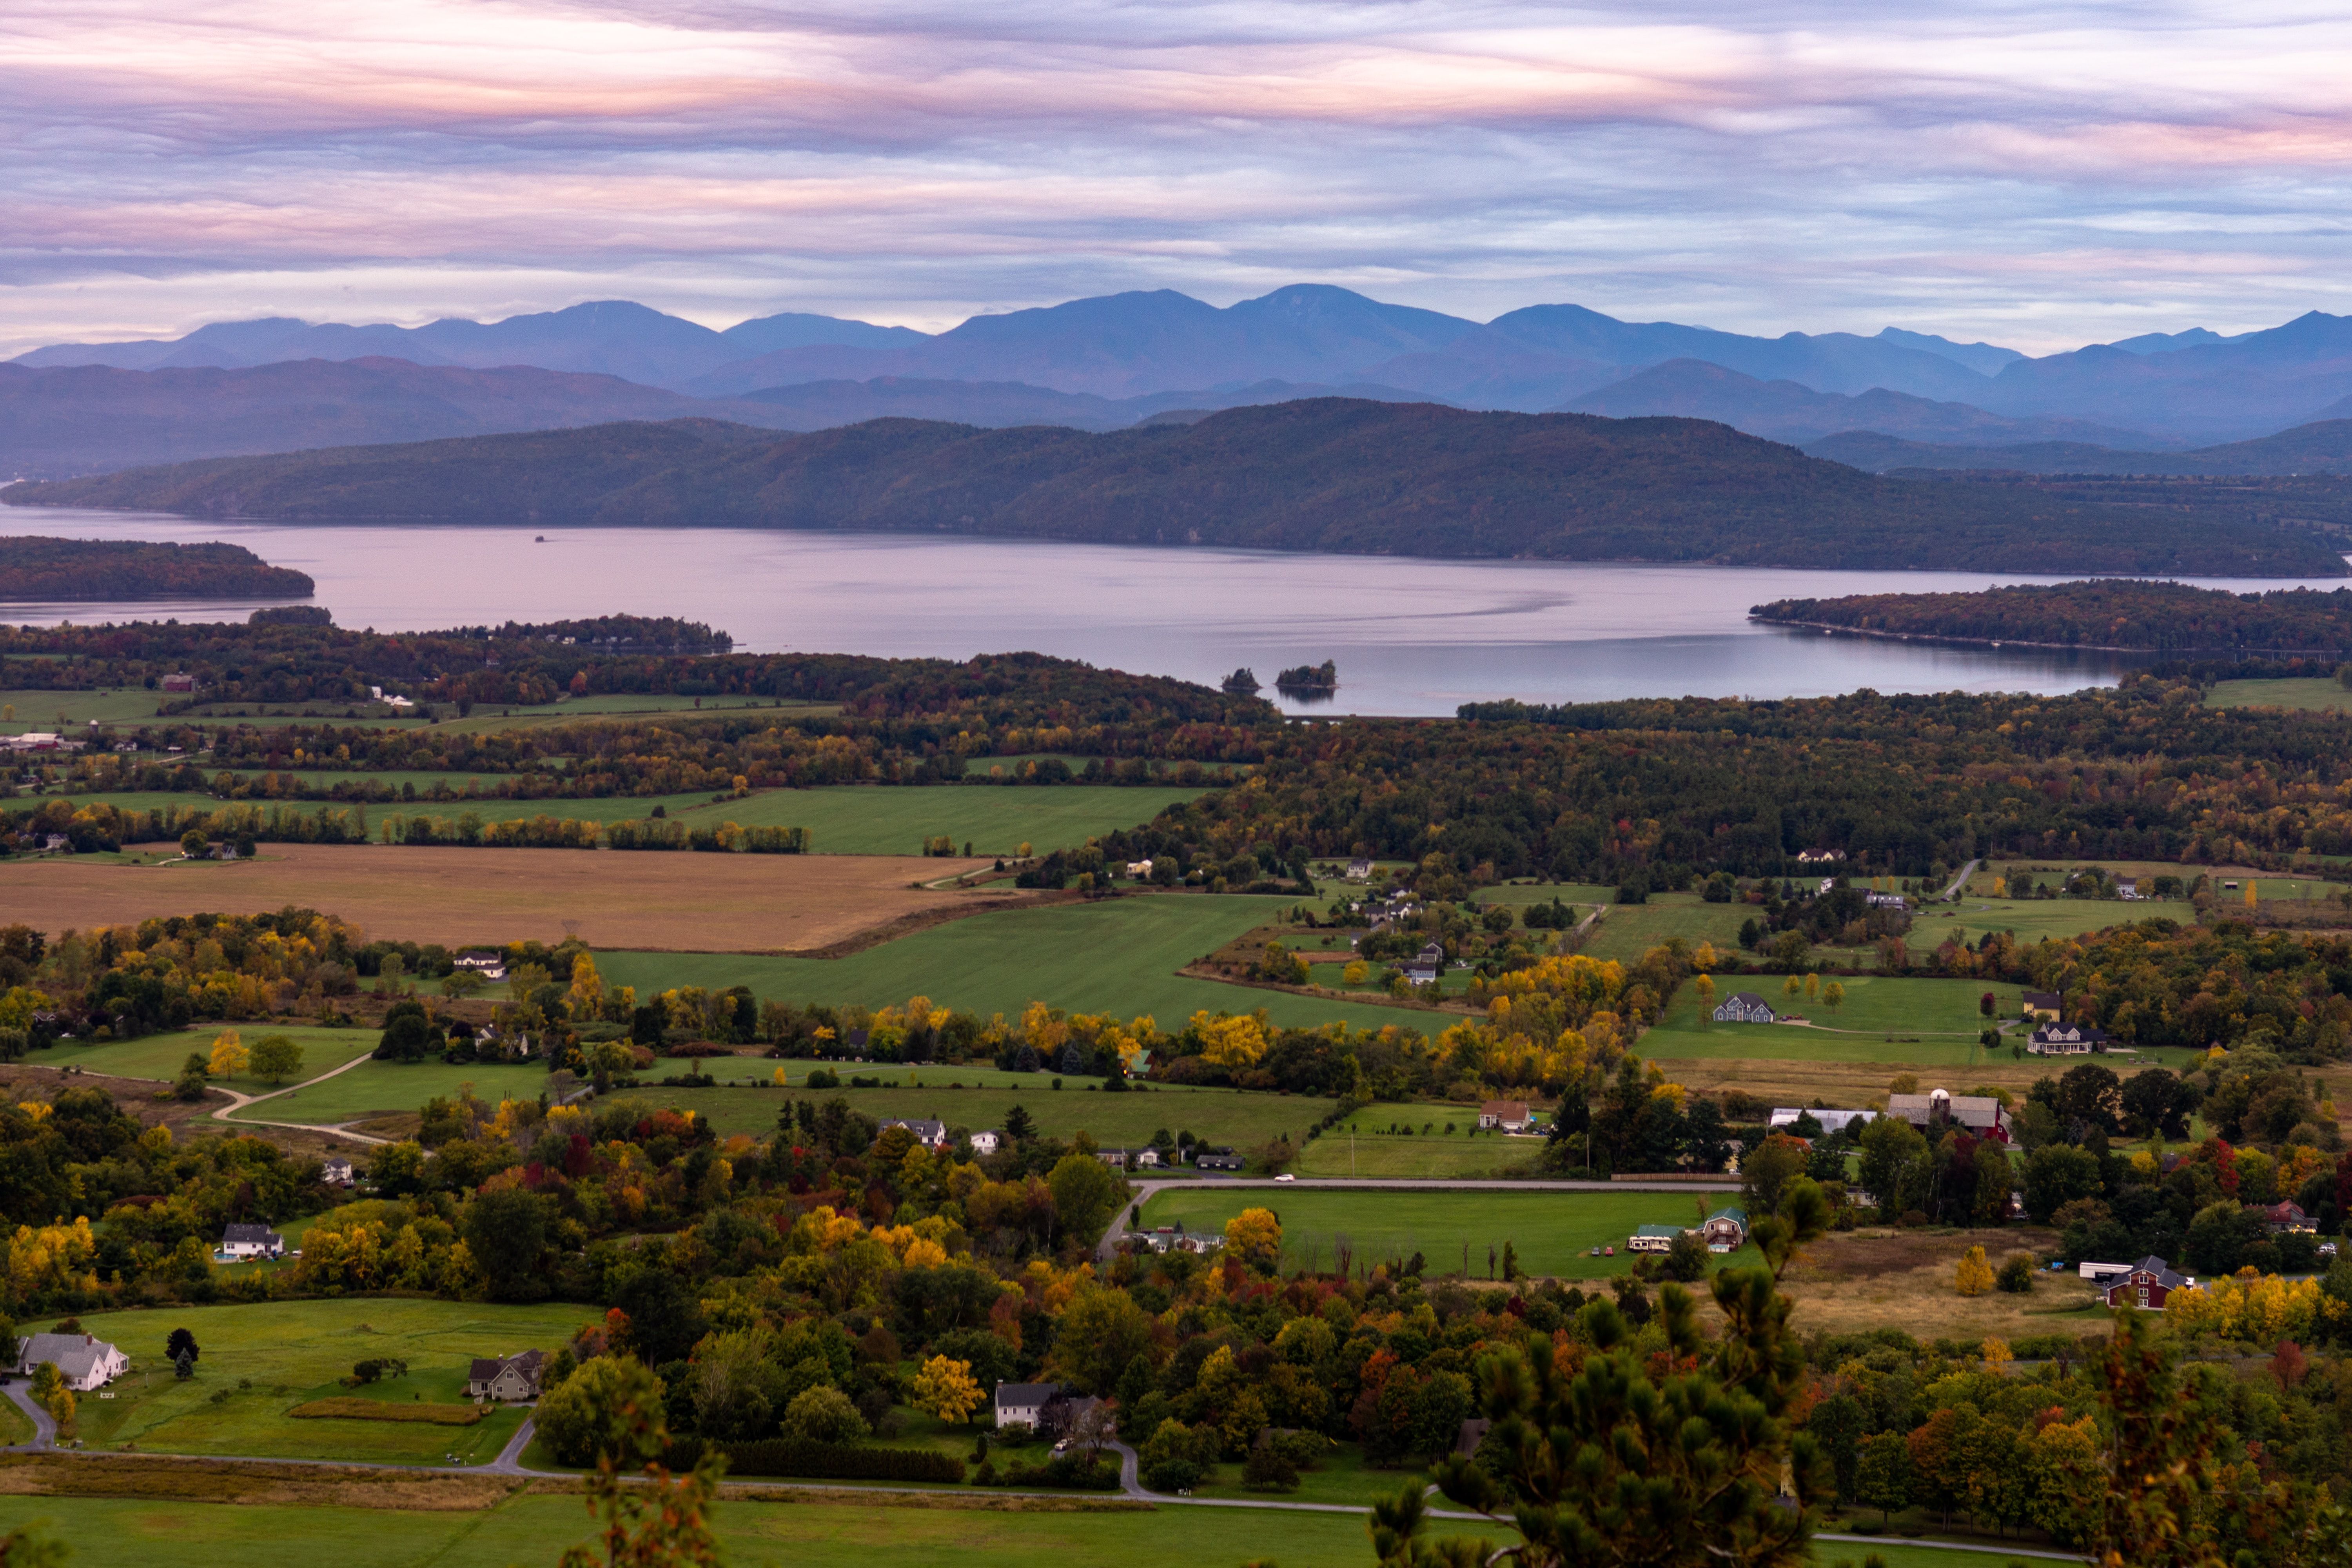 Aerial picture of Champlain Valley in Vermont with houses, a lake, and mountains in the background